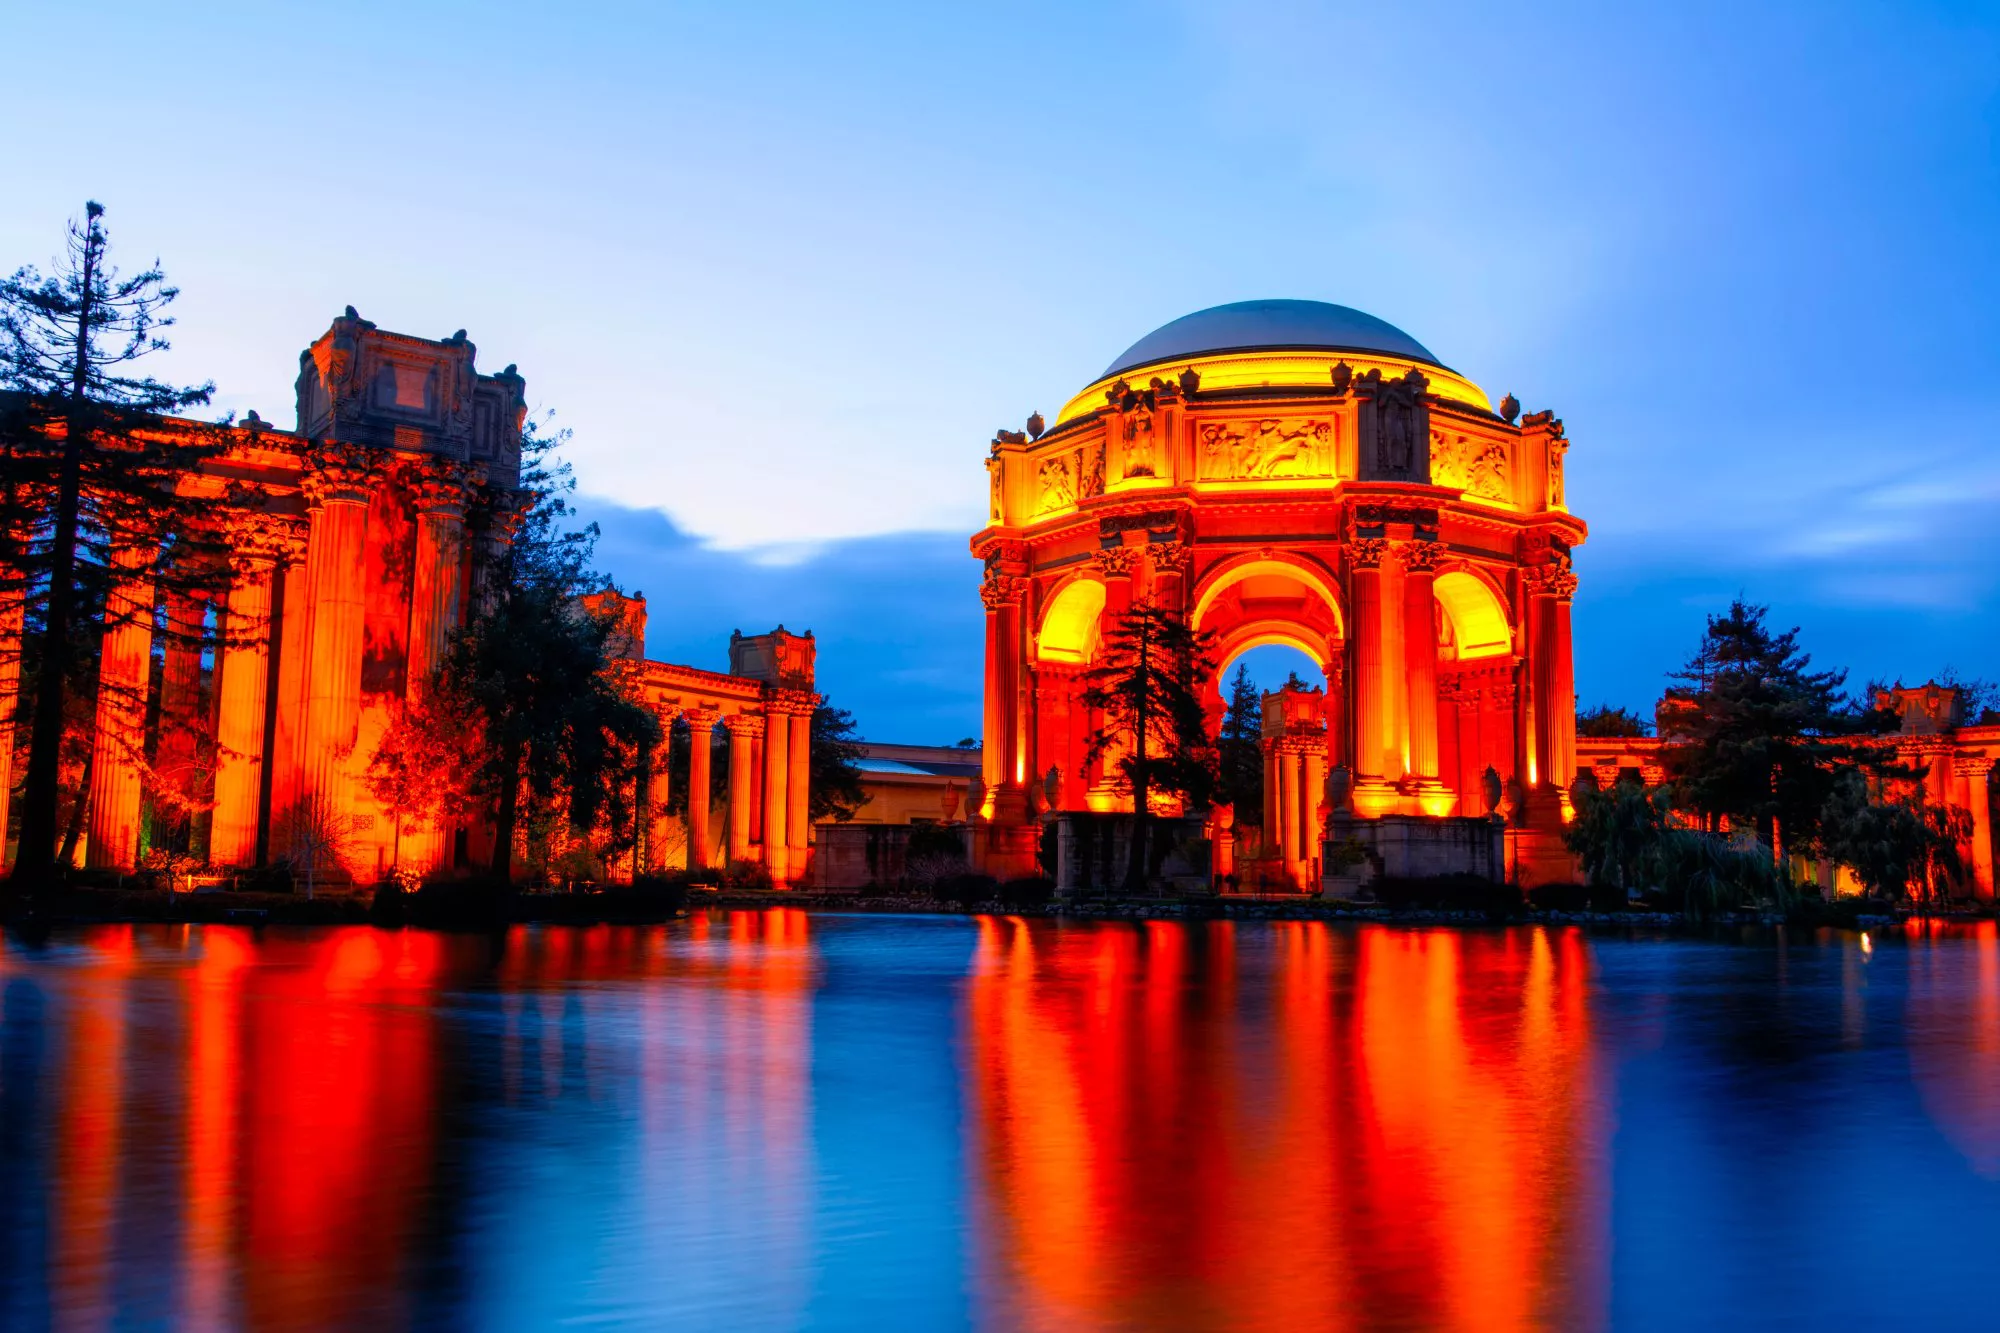 Palace of Fine Arts Theater